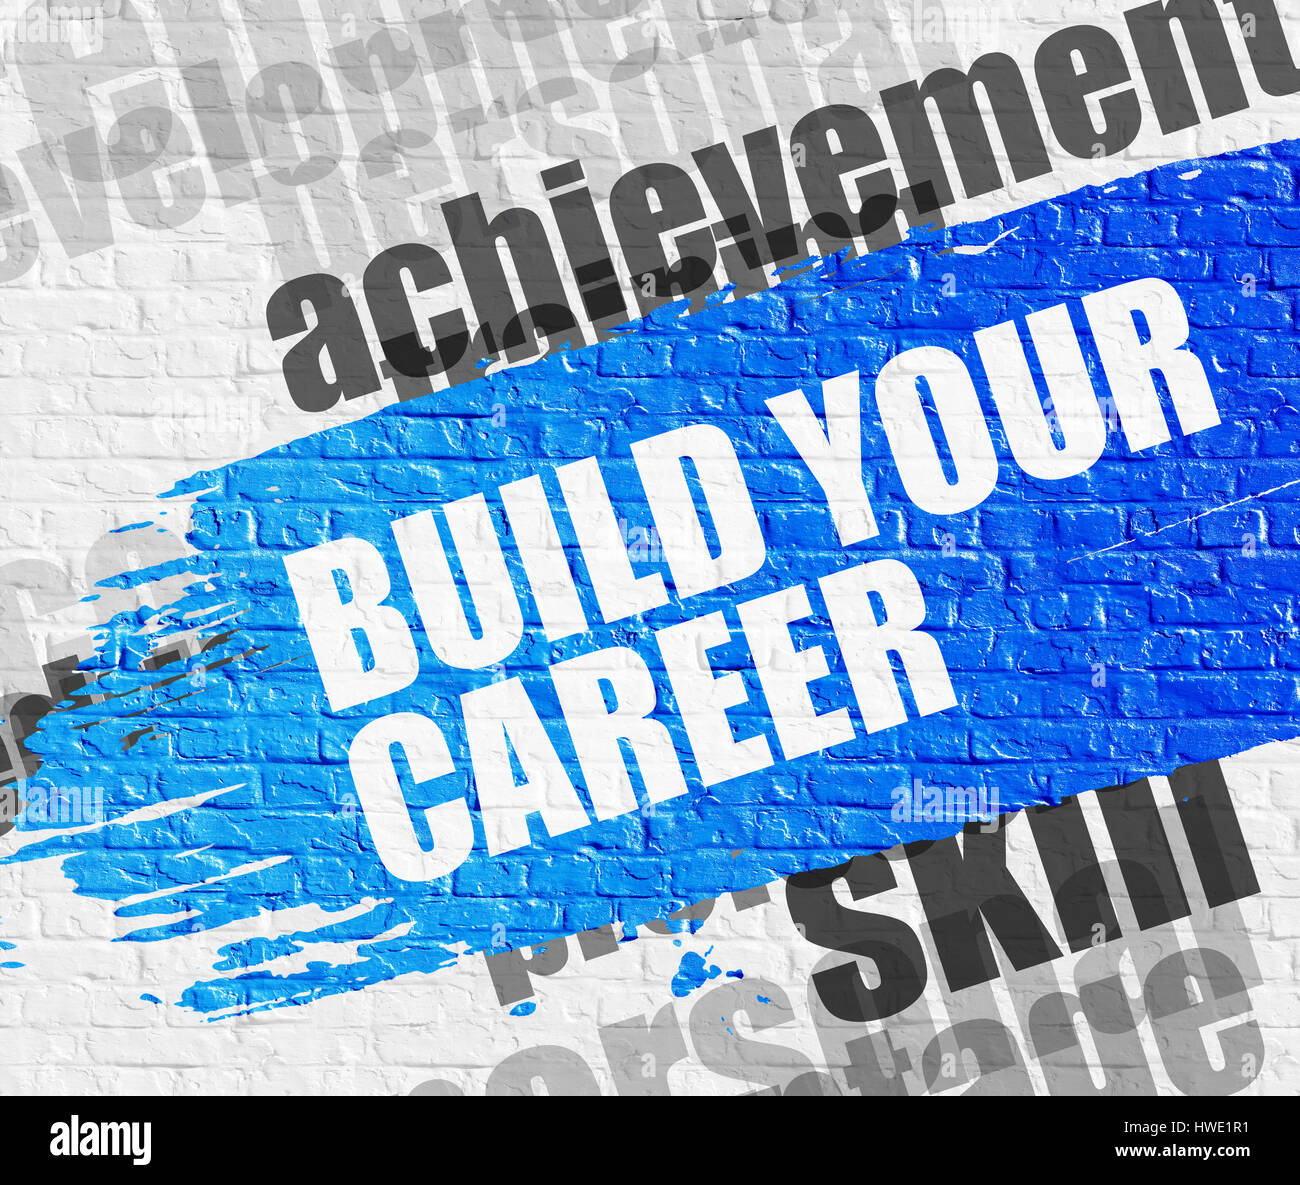 Build Your Career on White Brick Wall. Stock Photo